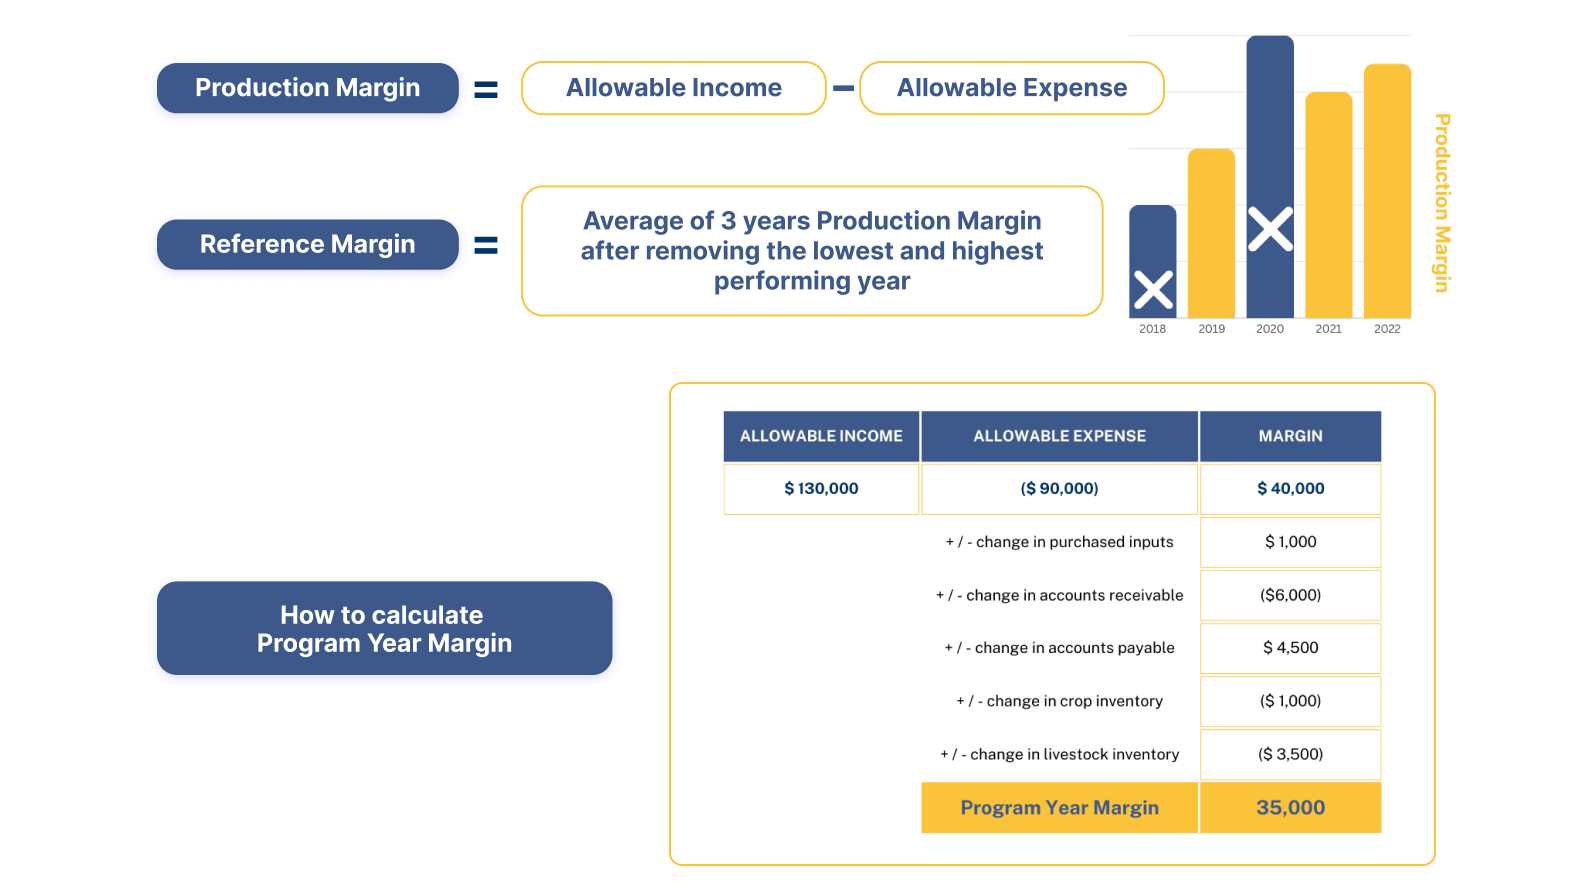 AgriStability uses the five-year Olympic Average Margin, which does not include the highest and lowest years.